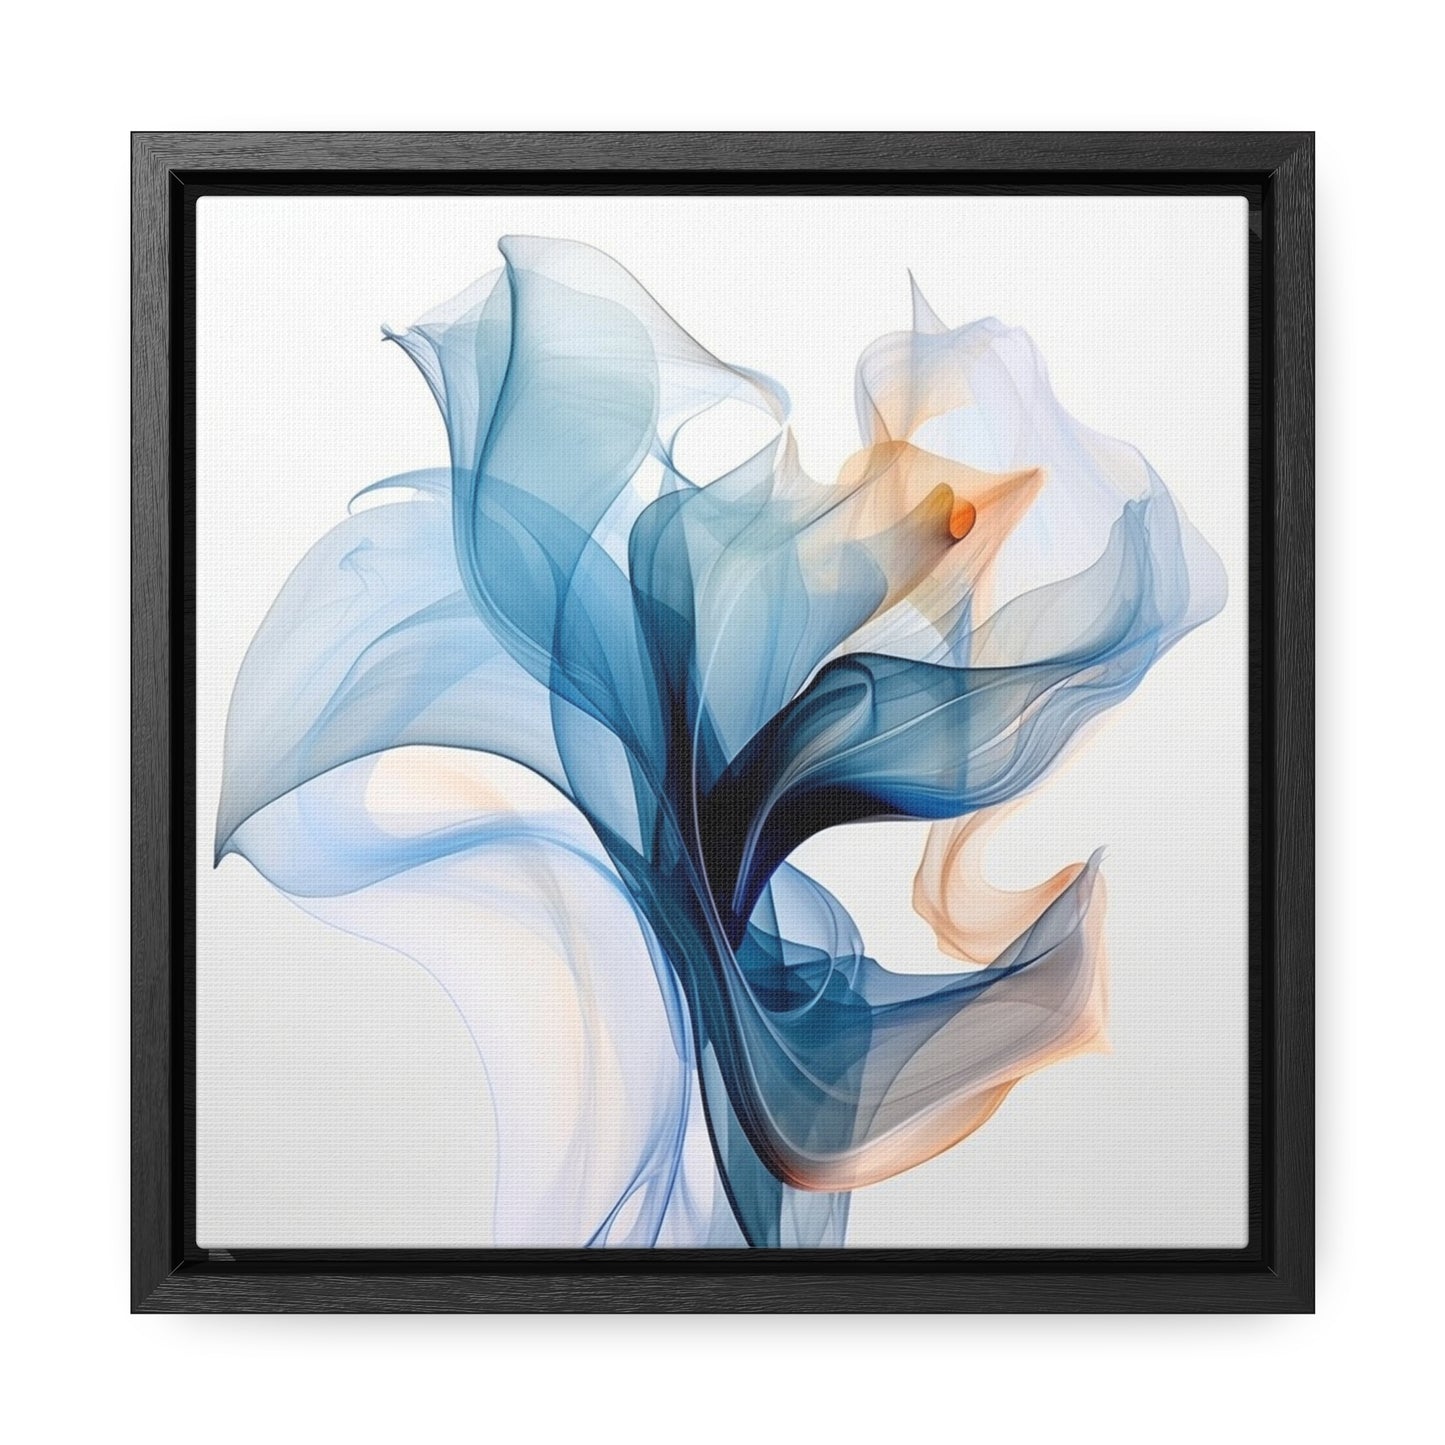 Gallery Canvas Wraps, Square Frame Blue Tluip Abstract 3